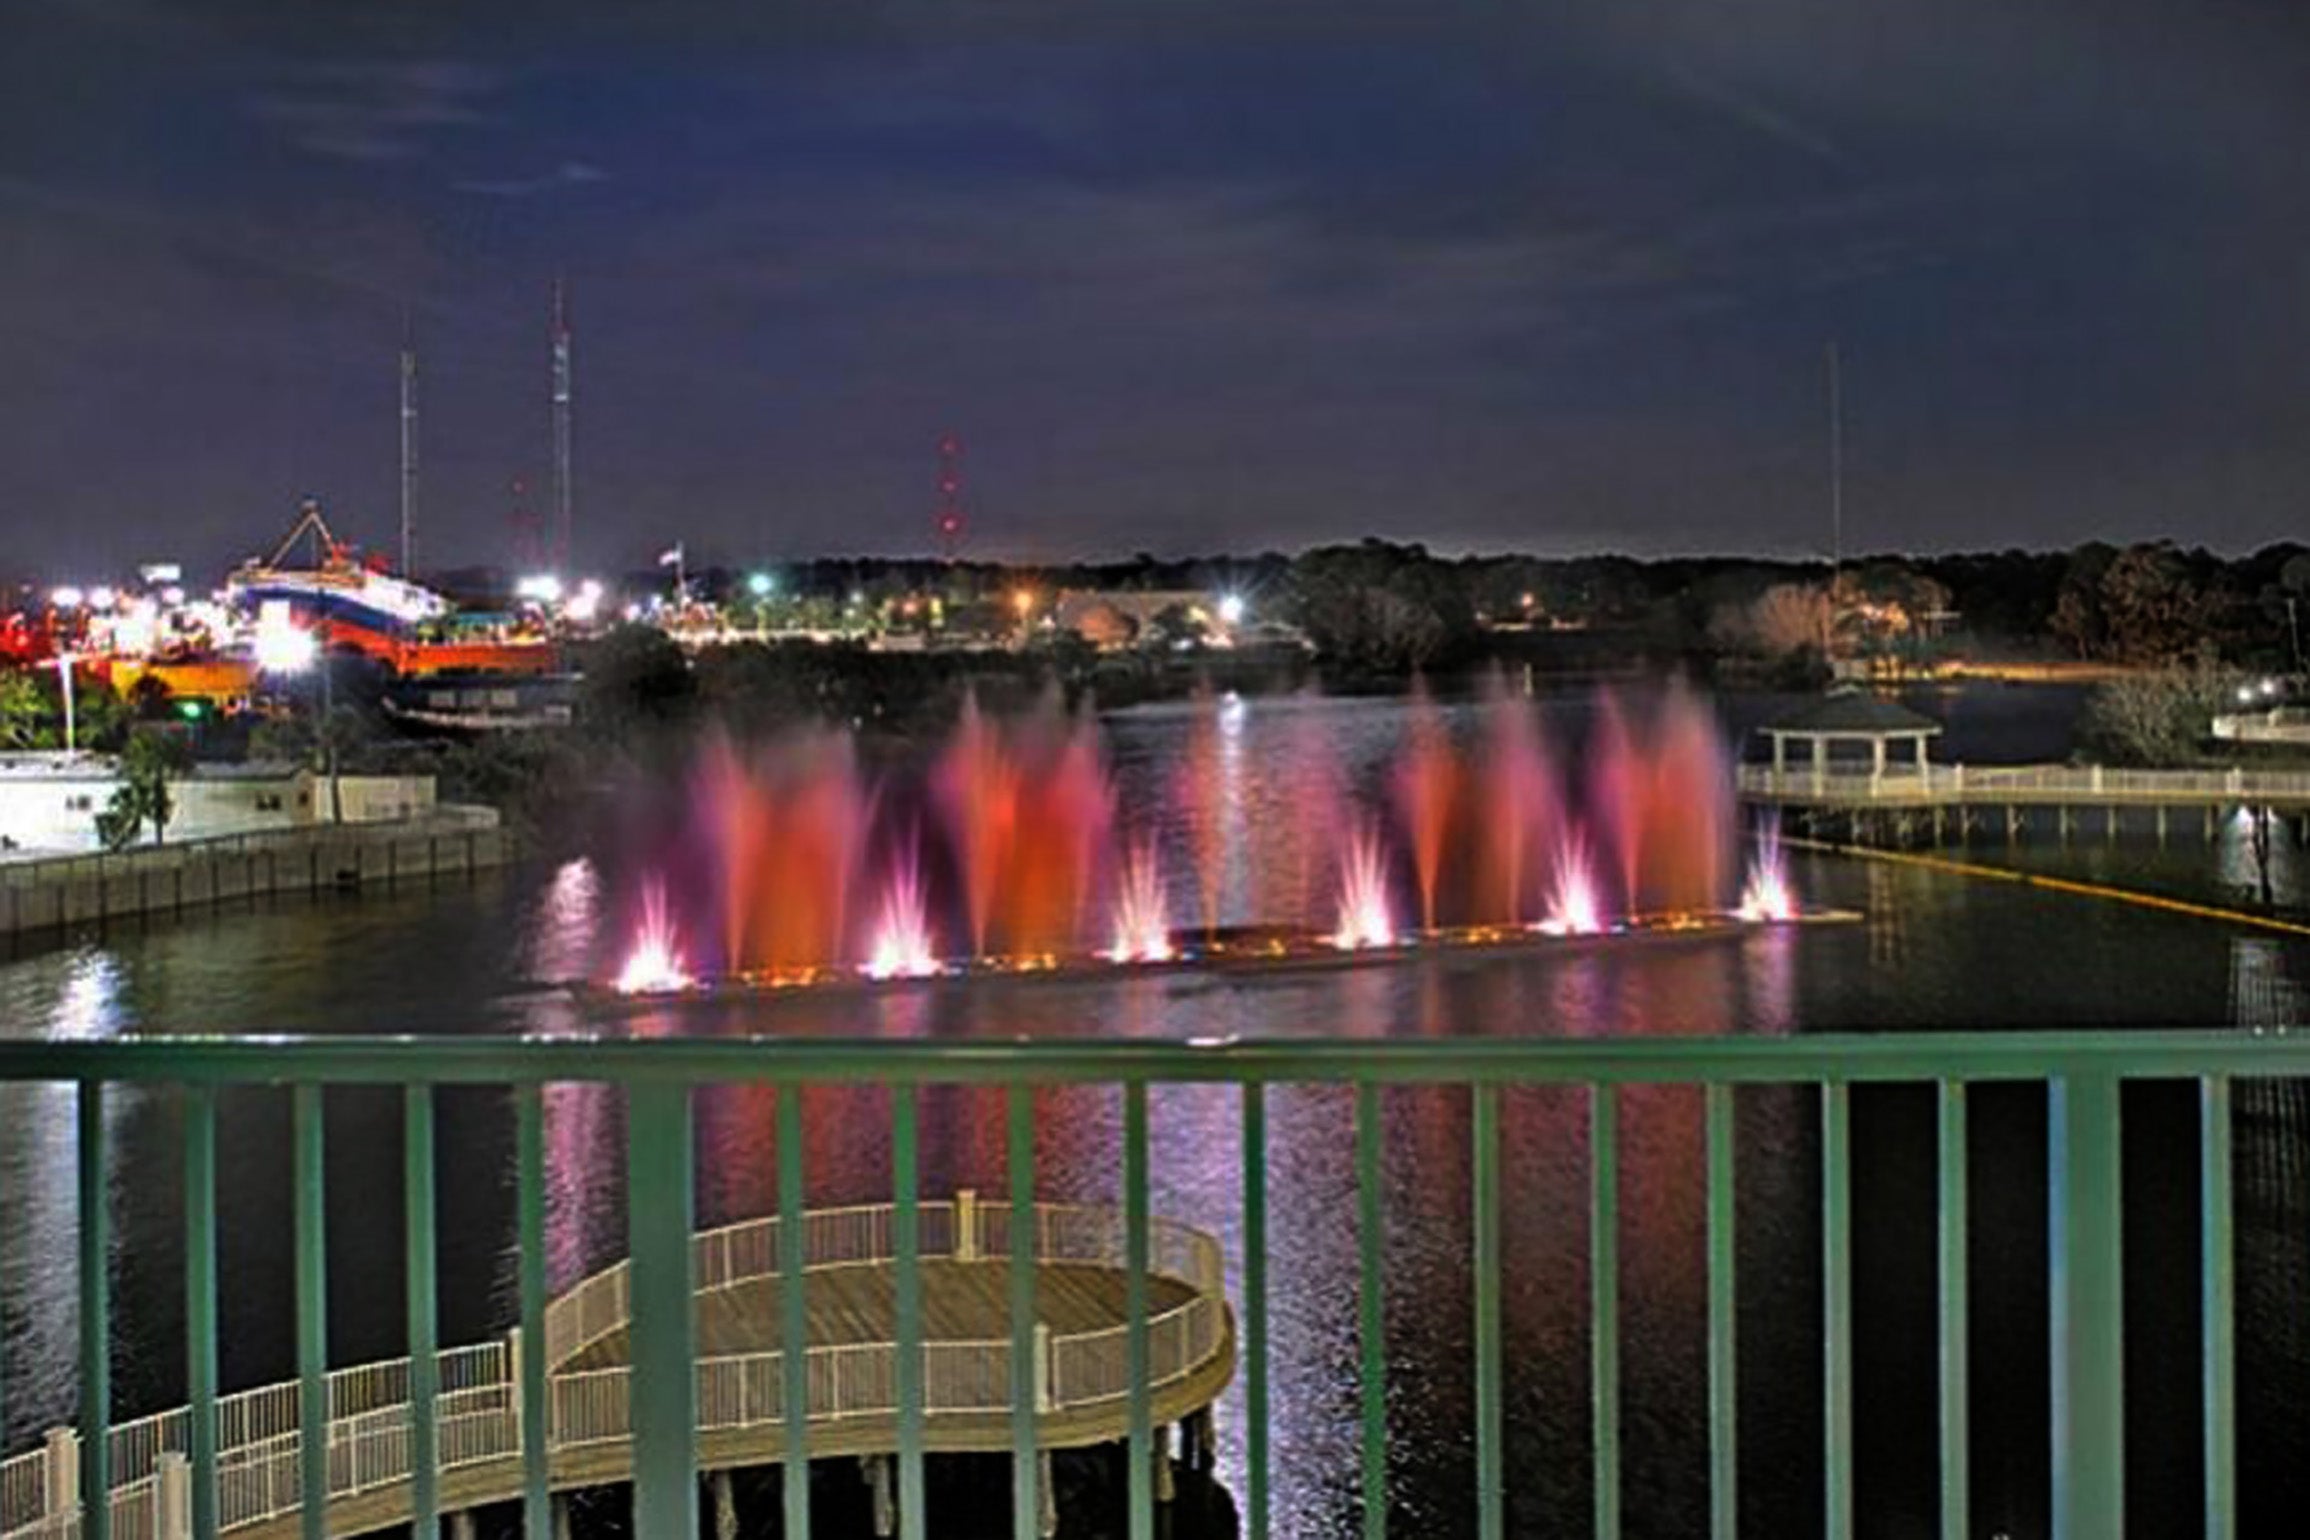 Front row seat to the Fountain Show!